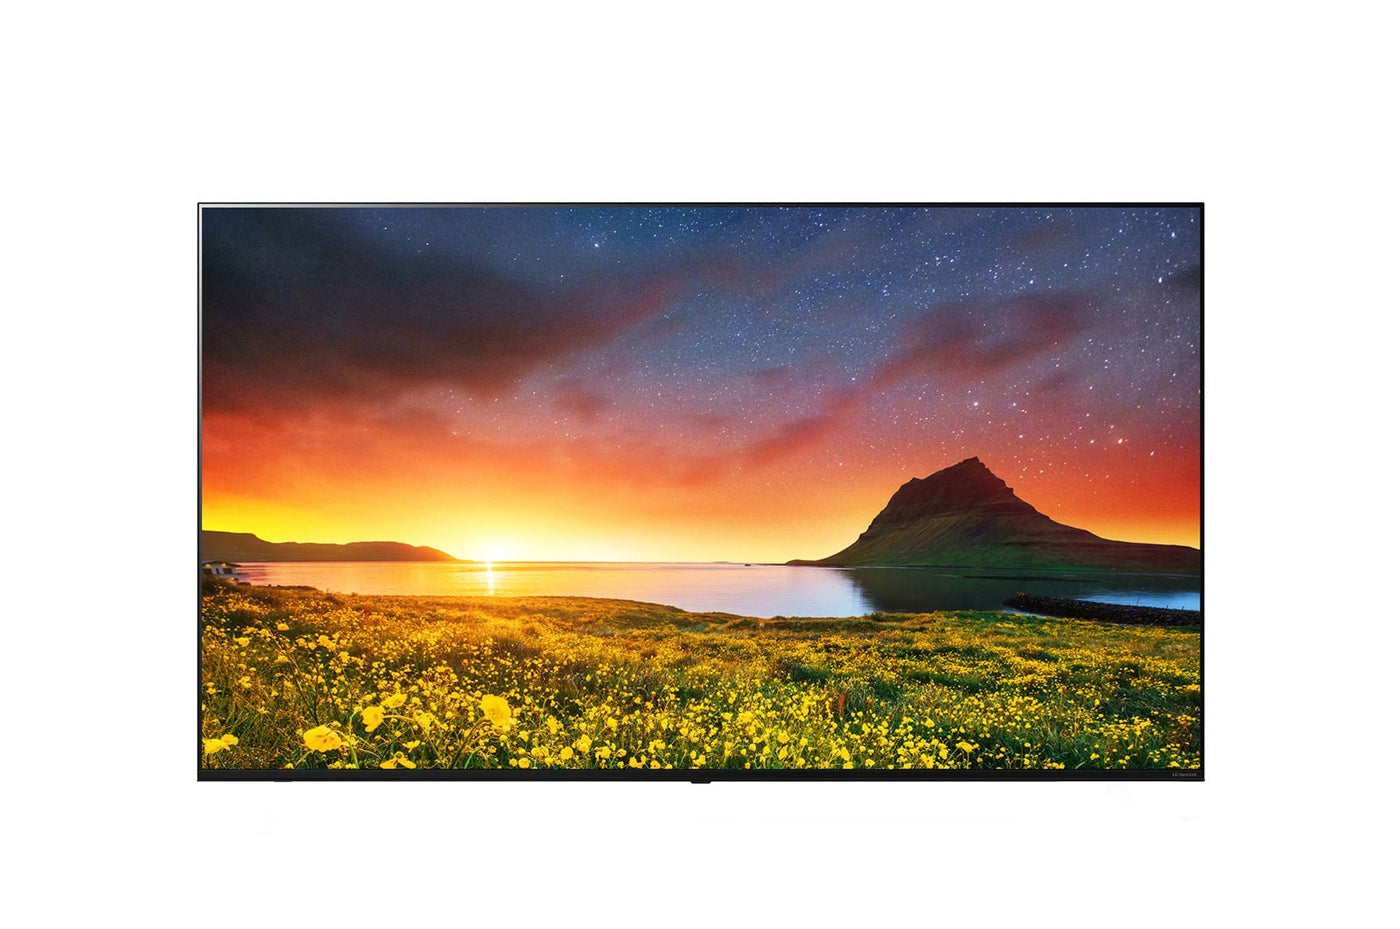 LG 50UR760H9 50" Pro:Centric 4K UHD Smart Hospitality TV Front View